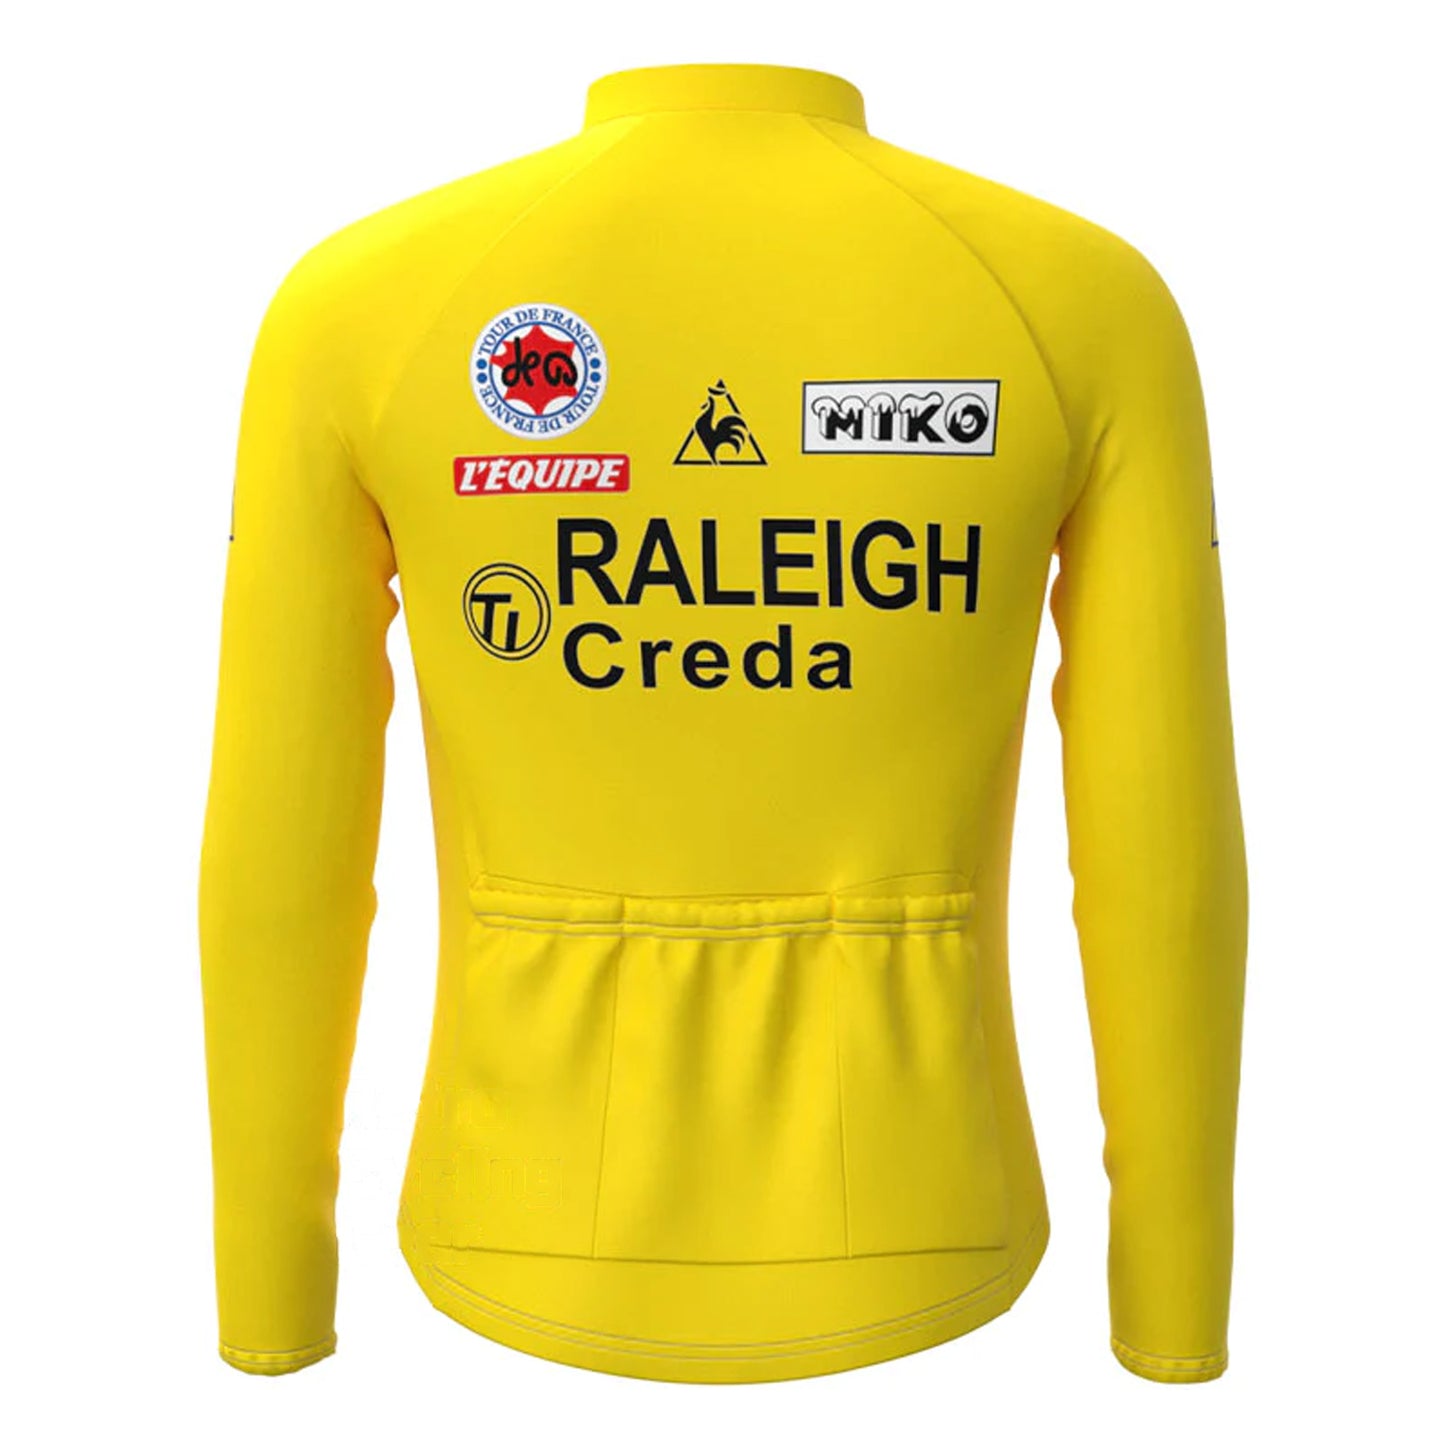 TI RALEIGH Yellow Vintage Long Sleeve Cycling Jersey Top